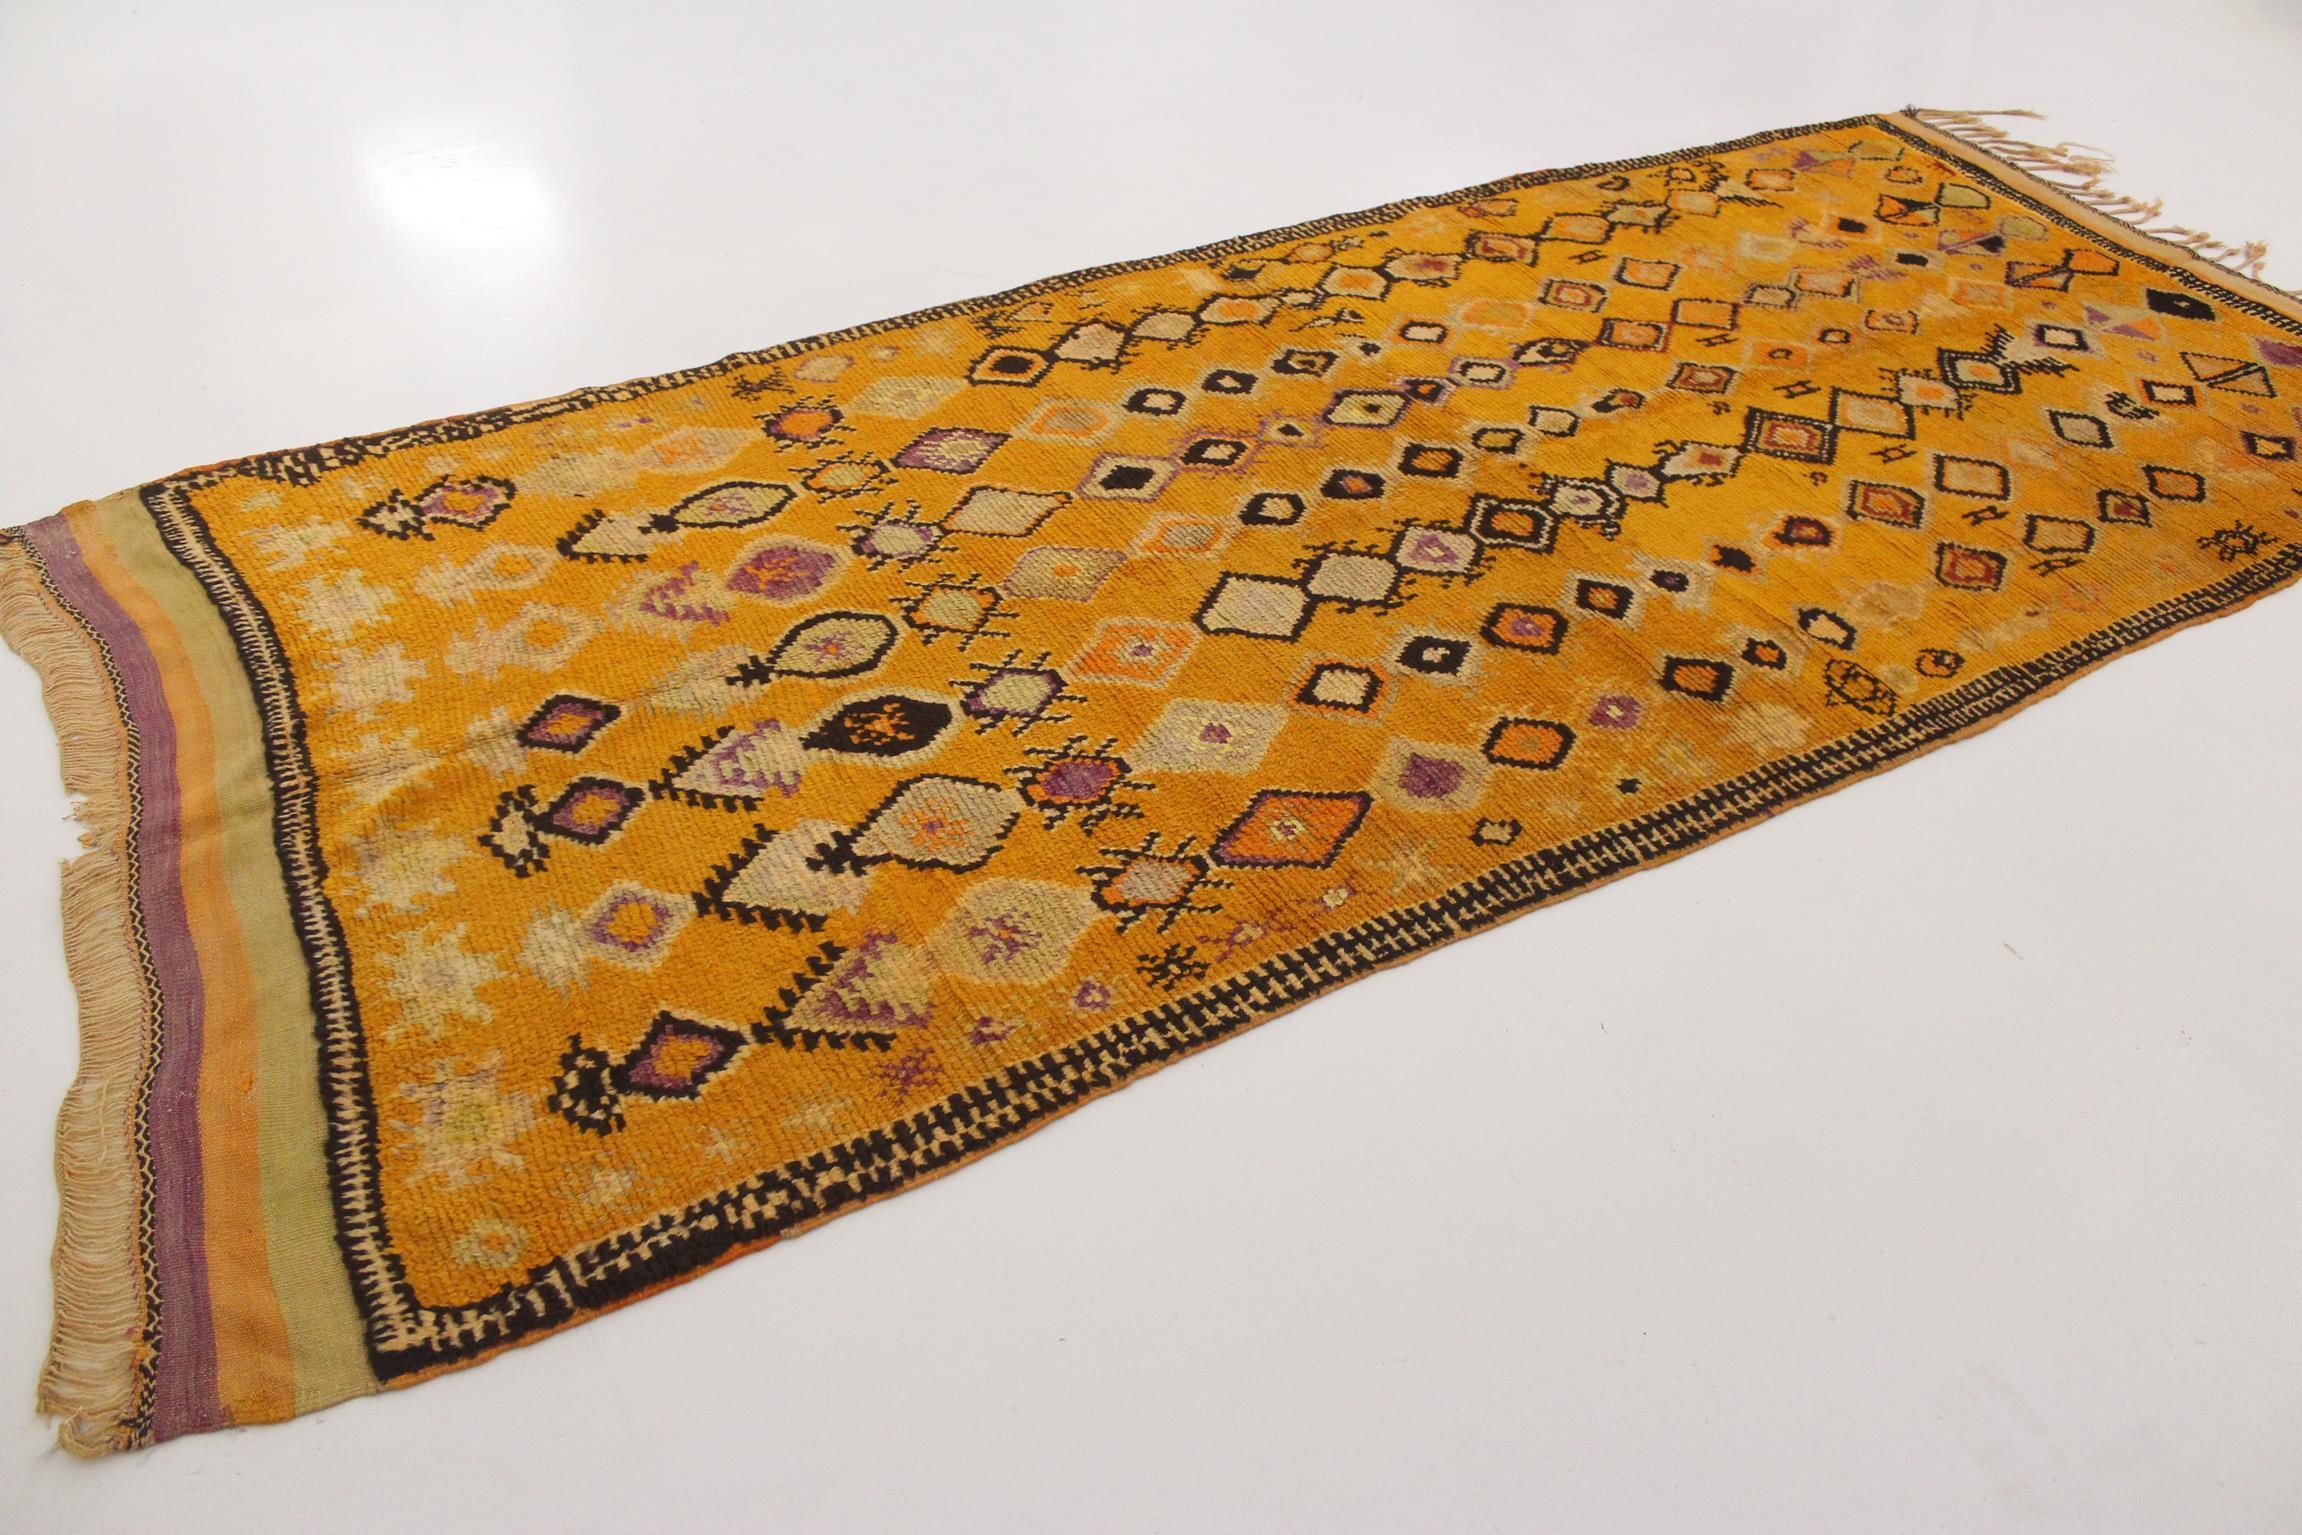 Vintage Ait Ouaouzguite rug - Yellow/purple/black - 5x12.1feet / 152x370cm In Fair Condition For Sale In Marrakech, MA